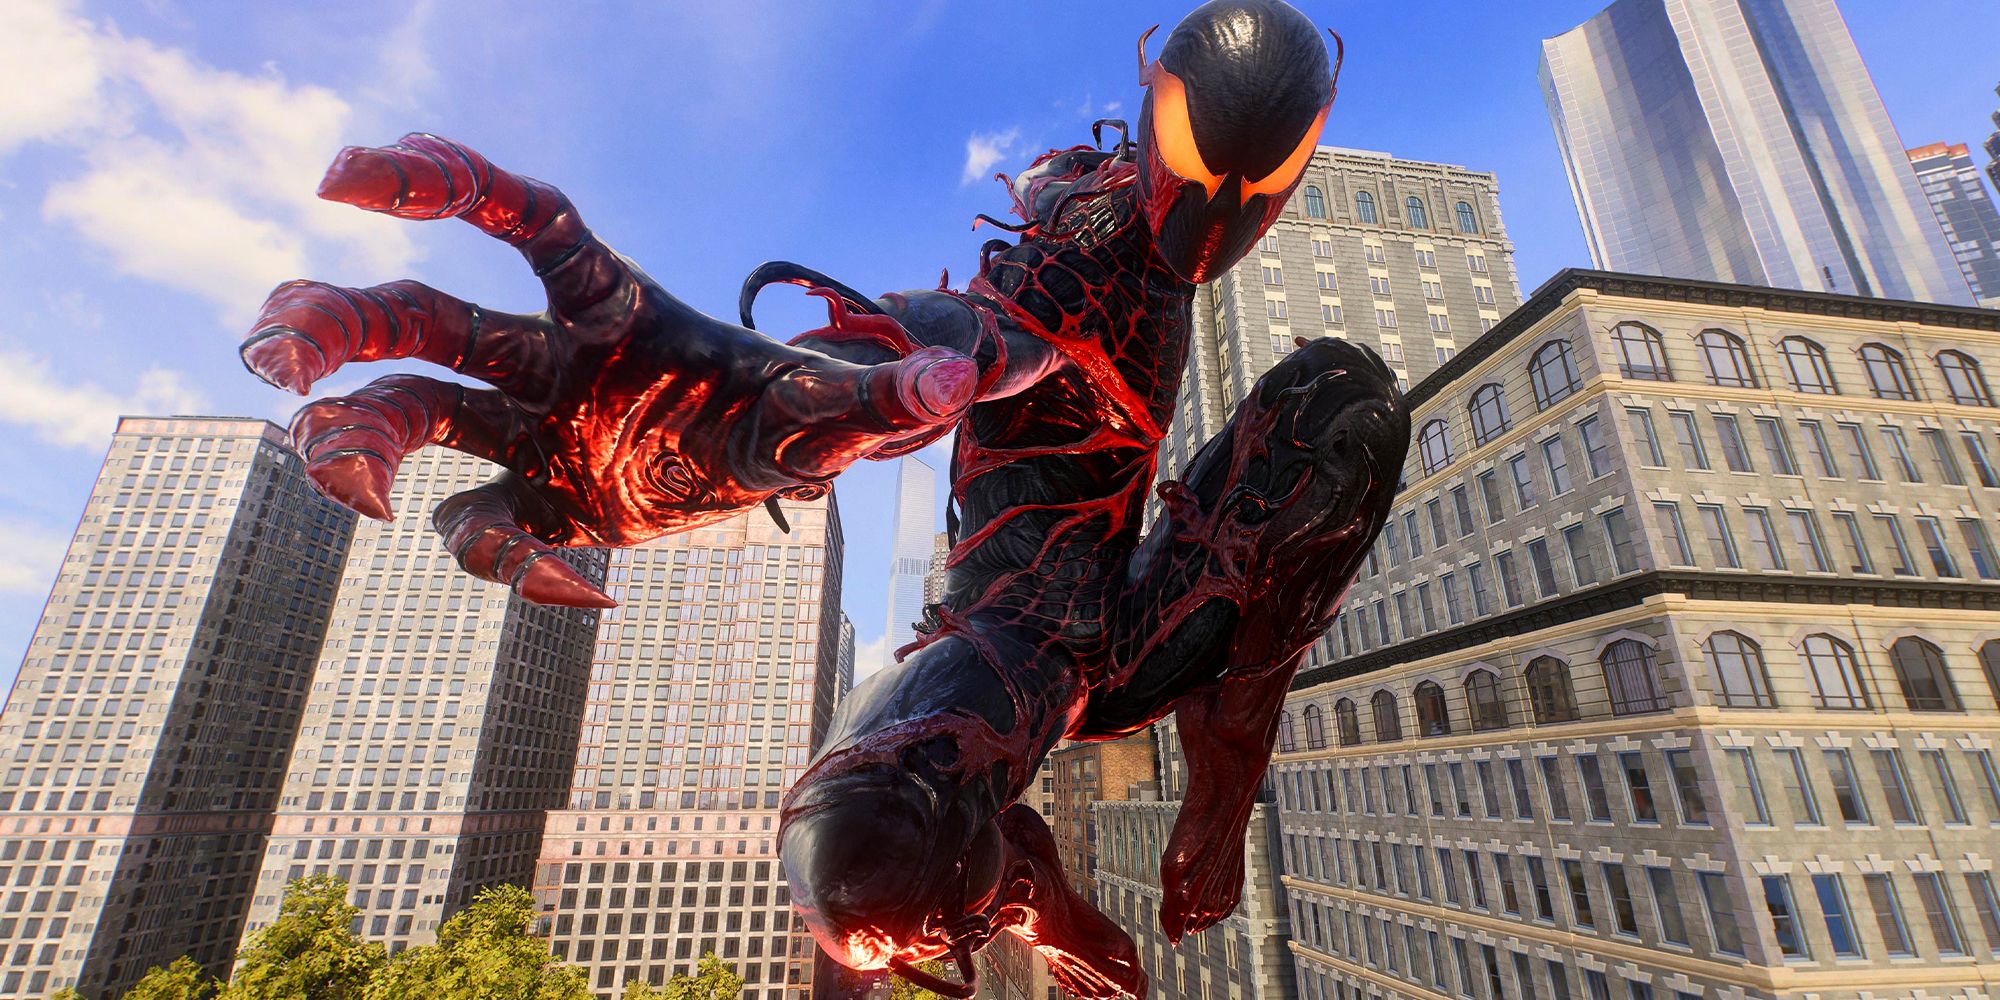 Carnage Miles Morales reaching for the camera in Marvel's Spider-Man 2